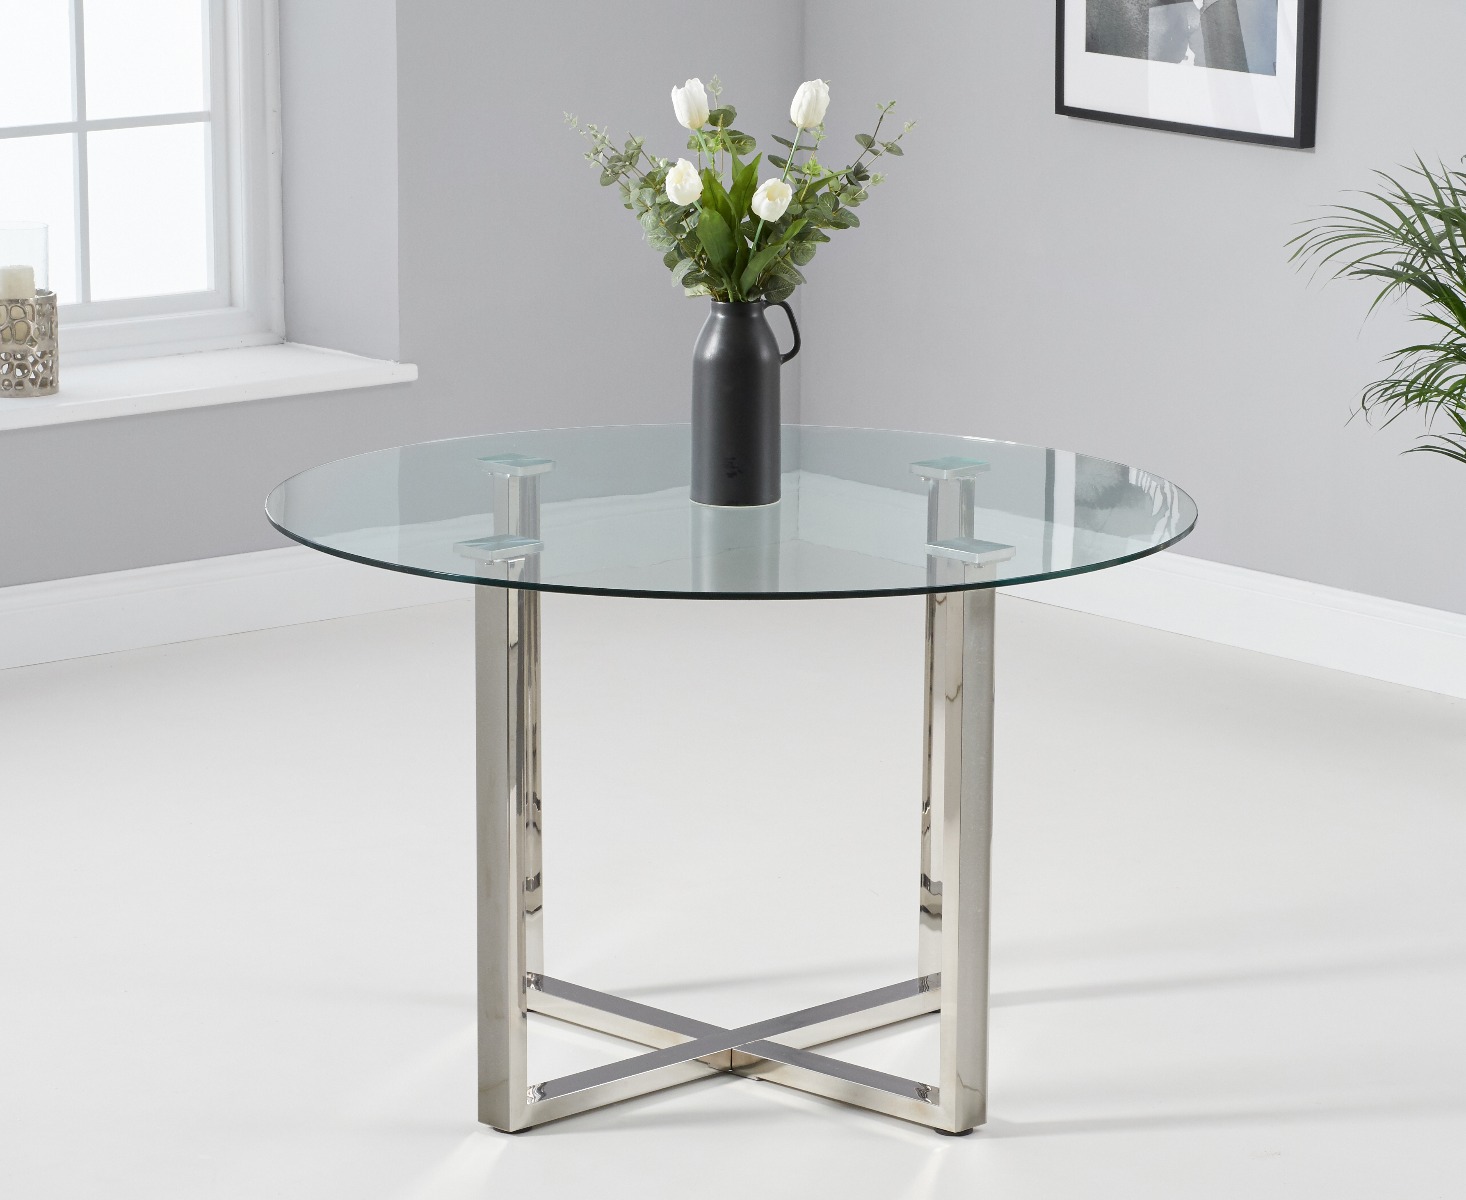 Photo 4 of Vaso 120cm round glass dining table with 4 white enzo chairs